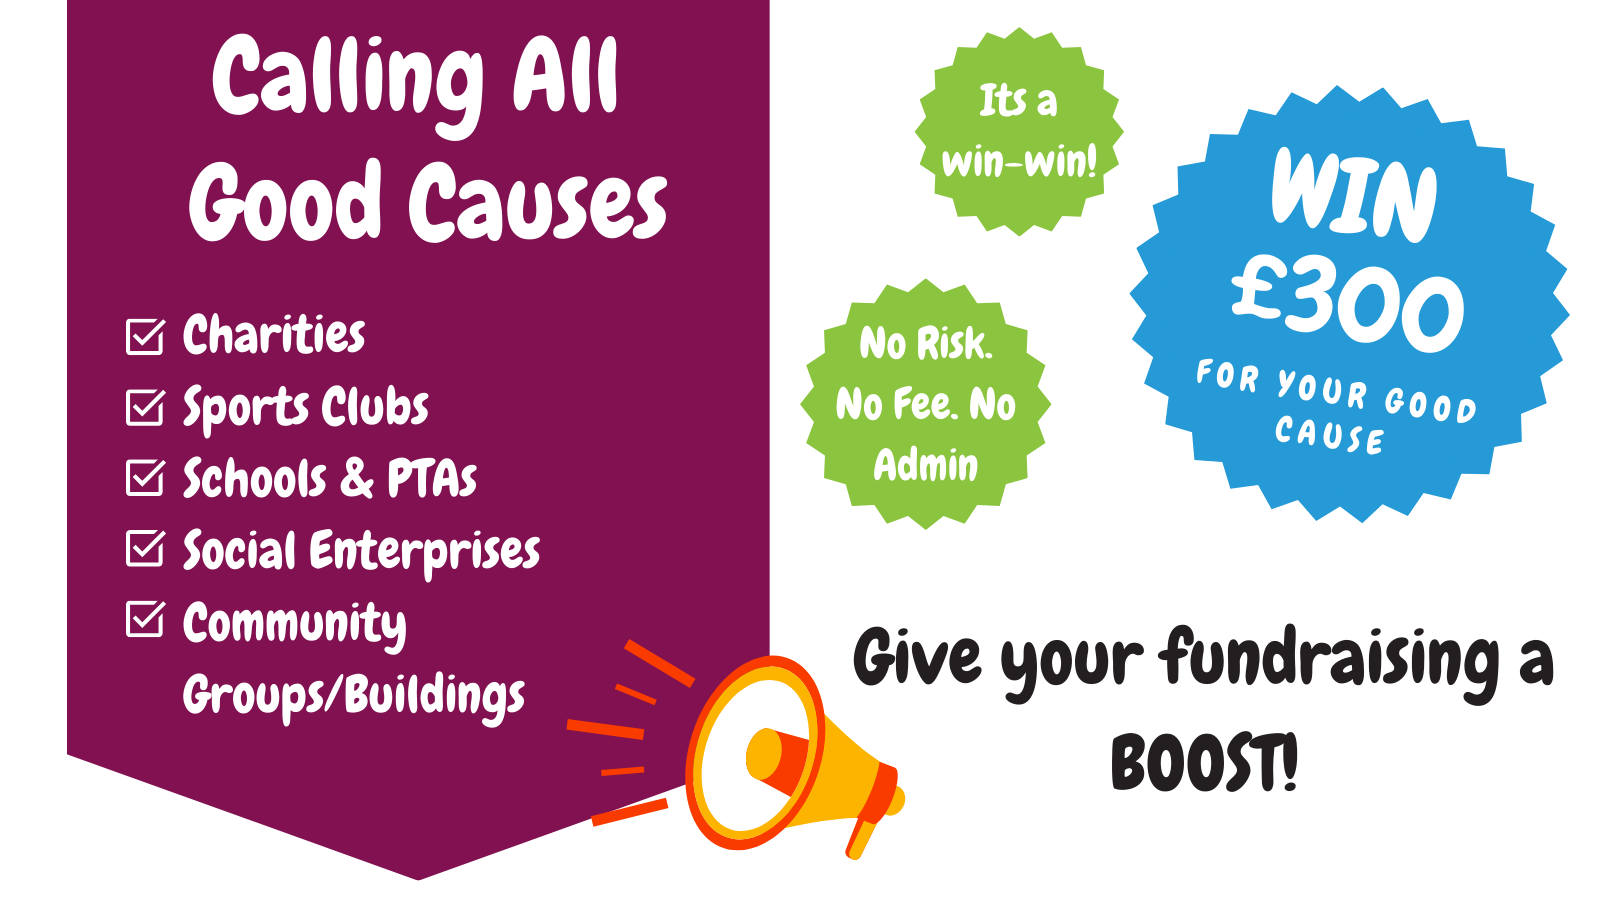 Calling All Good Causes! Win £300 for your Good Cause and give your fundraising a boost